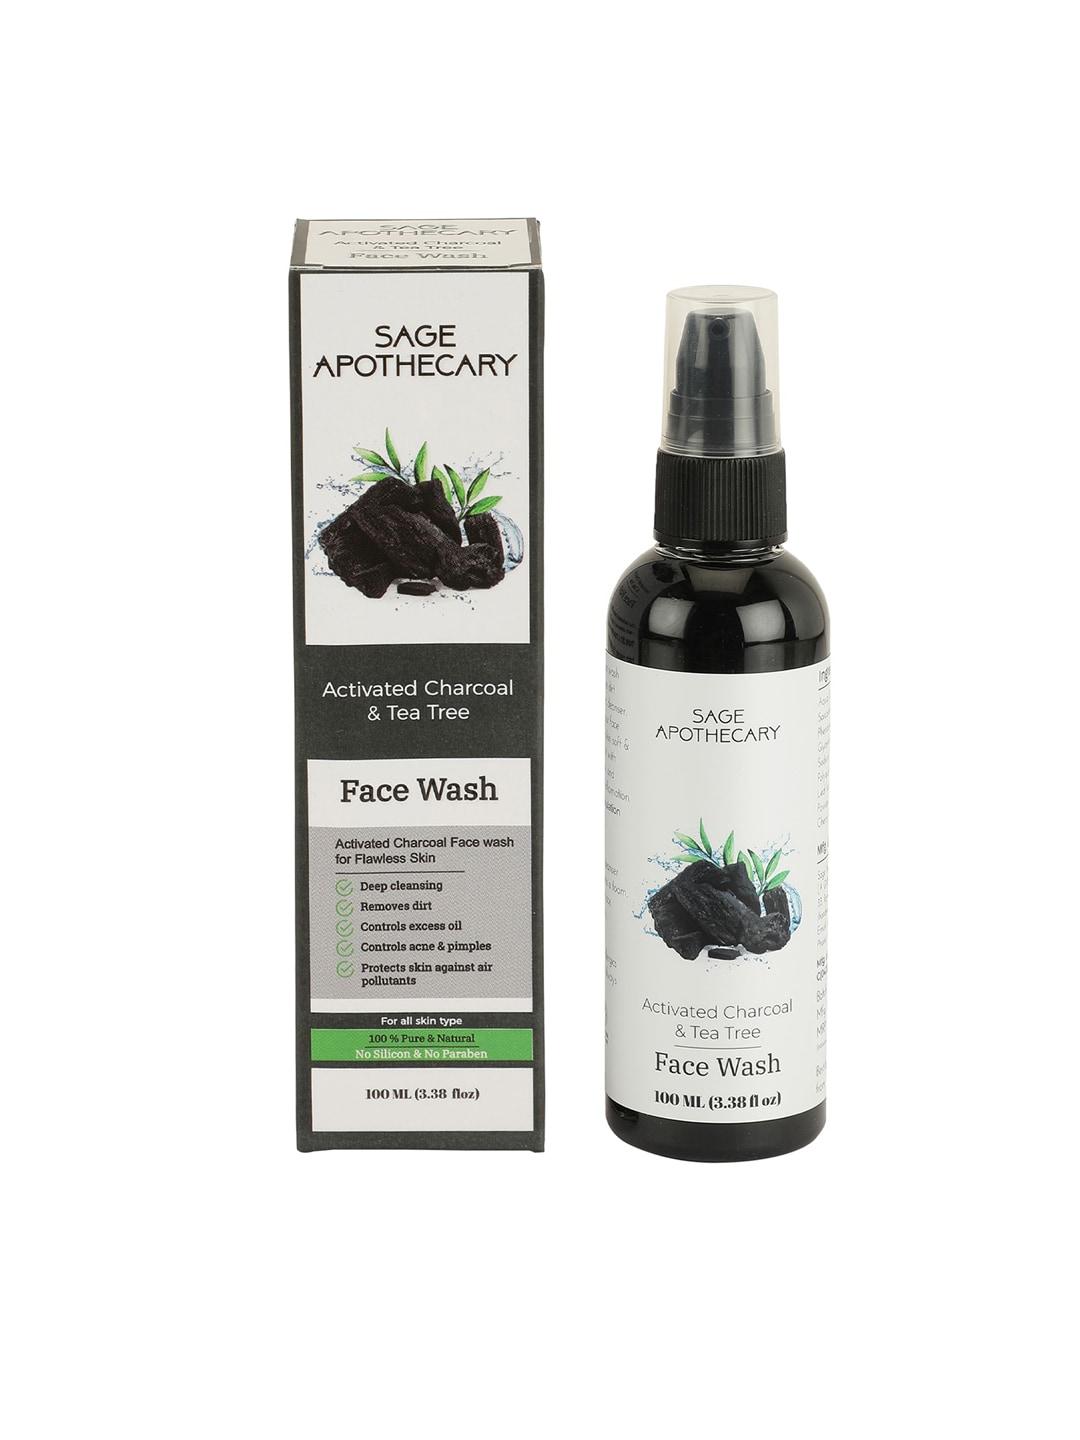 SAGE APOTHECARY Black Activated Charcoal Face Wash 100 Ml